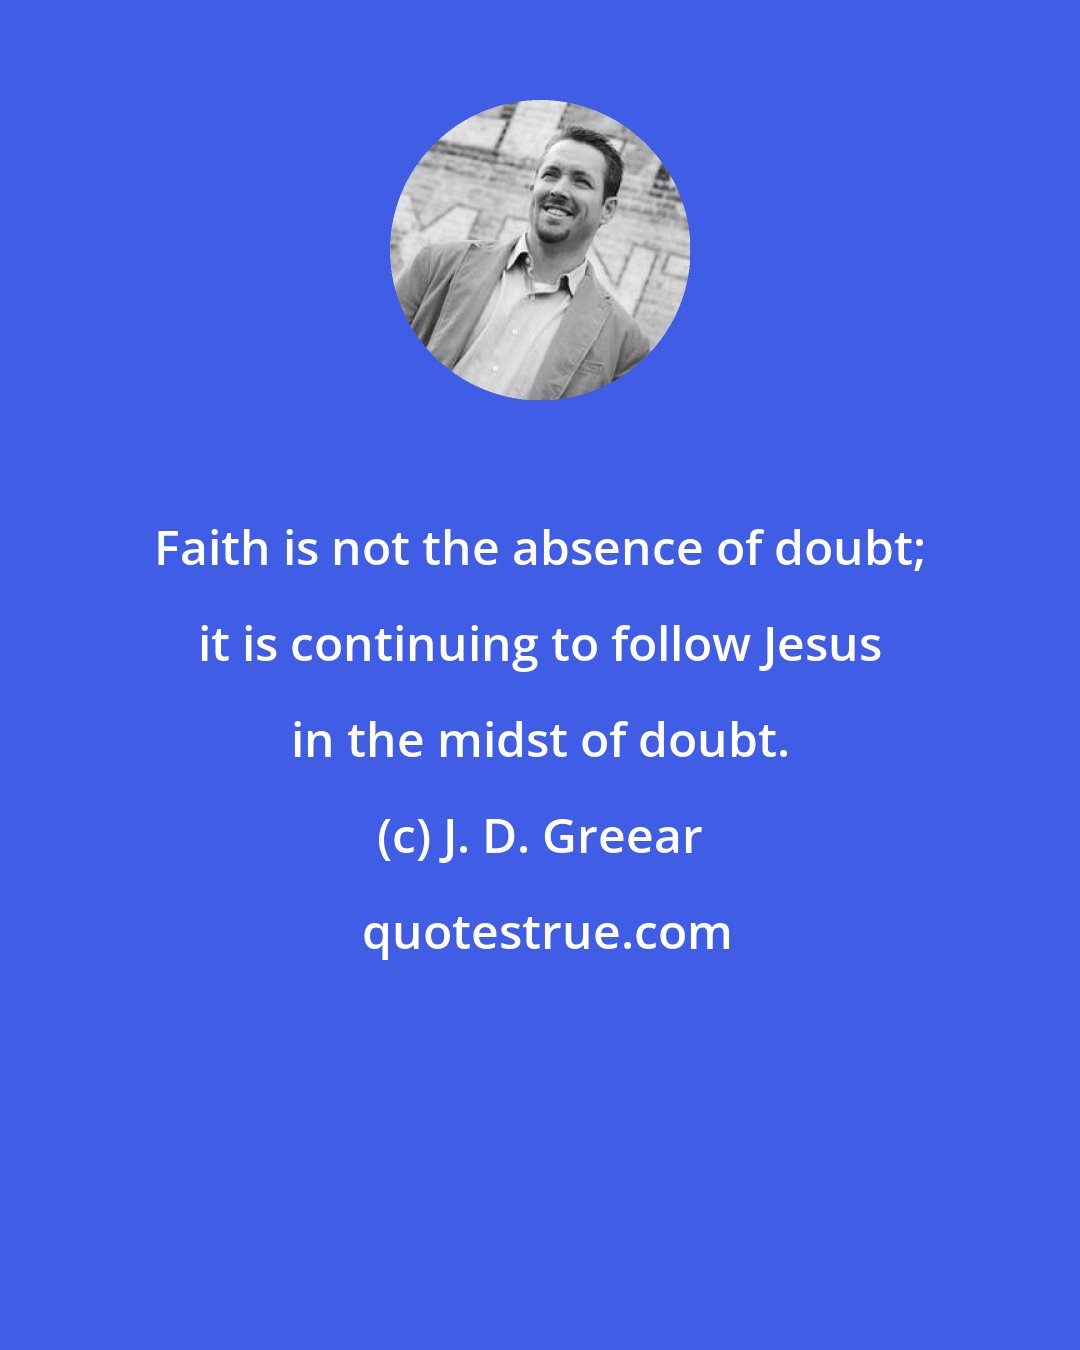 J. D. Greear: Faith is not the absence of doubt; it is continuing to follow Jesus in the midst of doubt.